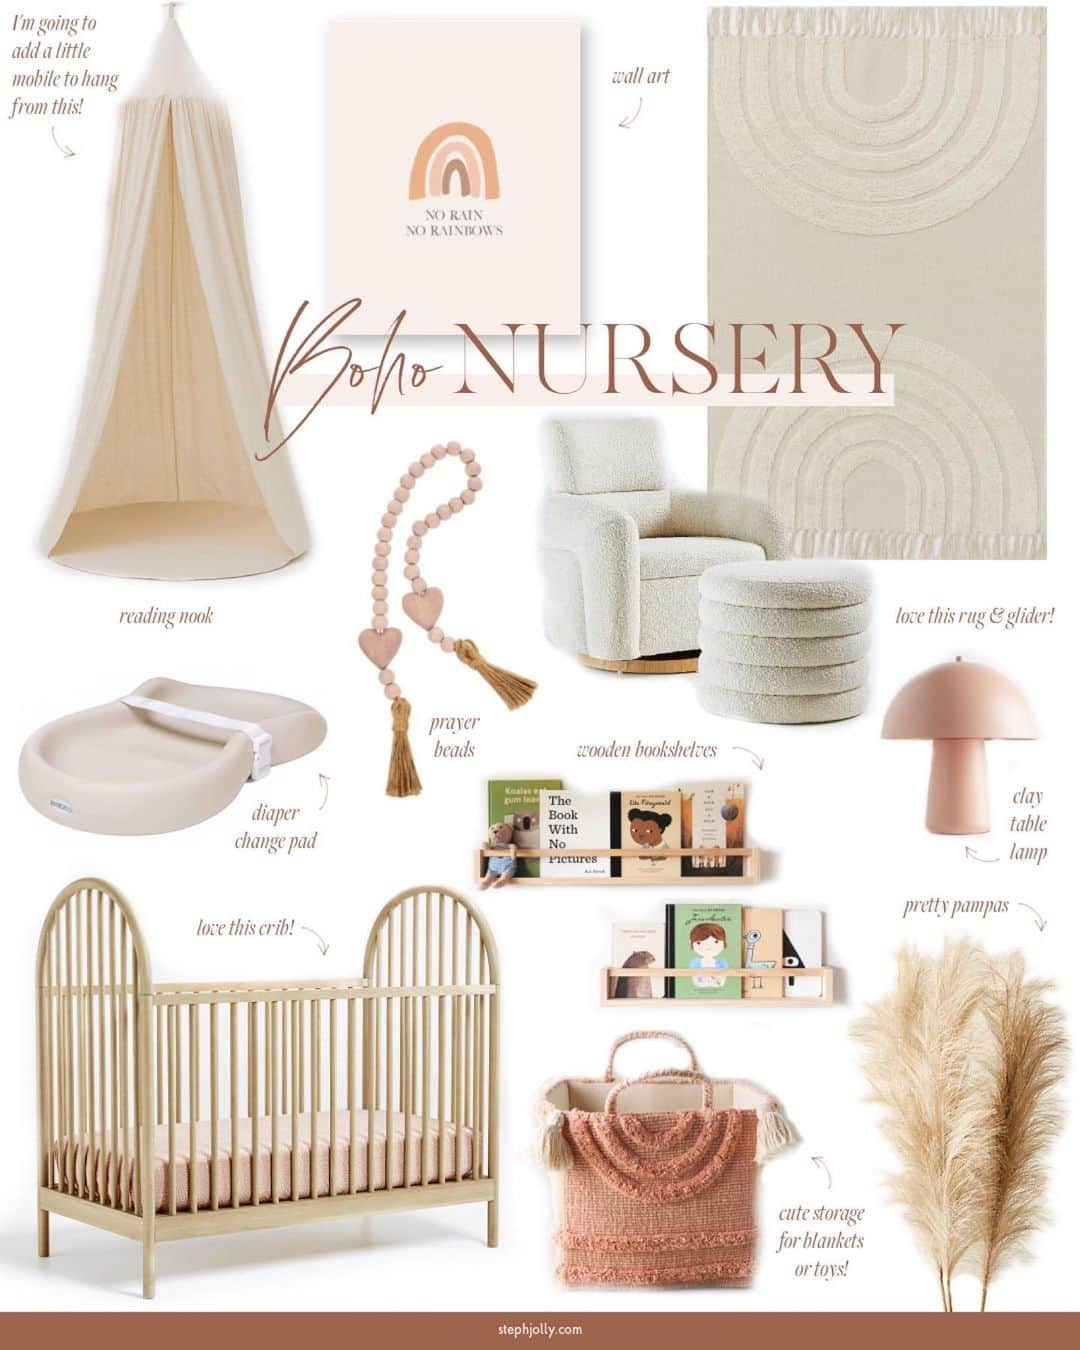 Stephanie Sterjovskiのインスタグラム：「Just started planning out the nursery for #babyjolly and I’m sharing some inspiration and pieces we are loving on the blog today! This will probably be one of the funnest design projects yet and we will be taking you along for the progress updates and DIYs here, on my blog & YouTube channel 😍 Question for you mamas! What are some nursery must haves or places you love to shop for baby decor? Tag or mention them down below! . Details linked here: http://liketk.it/38WxQ @liketoknow.it #liketkit #LTKbaby #LTKhome #LTKfamily #bohonursery #nurserydecor #nurseryinspo #crateandkids #forsuchatimeshop #printshop #babygirlnursery」